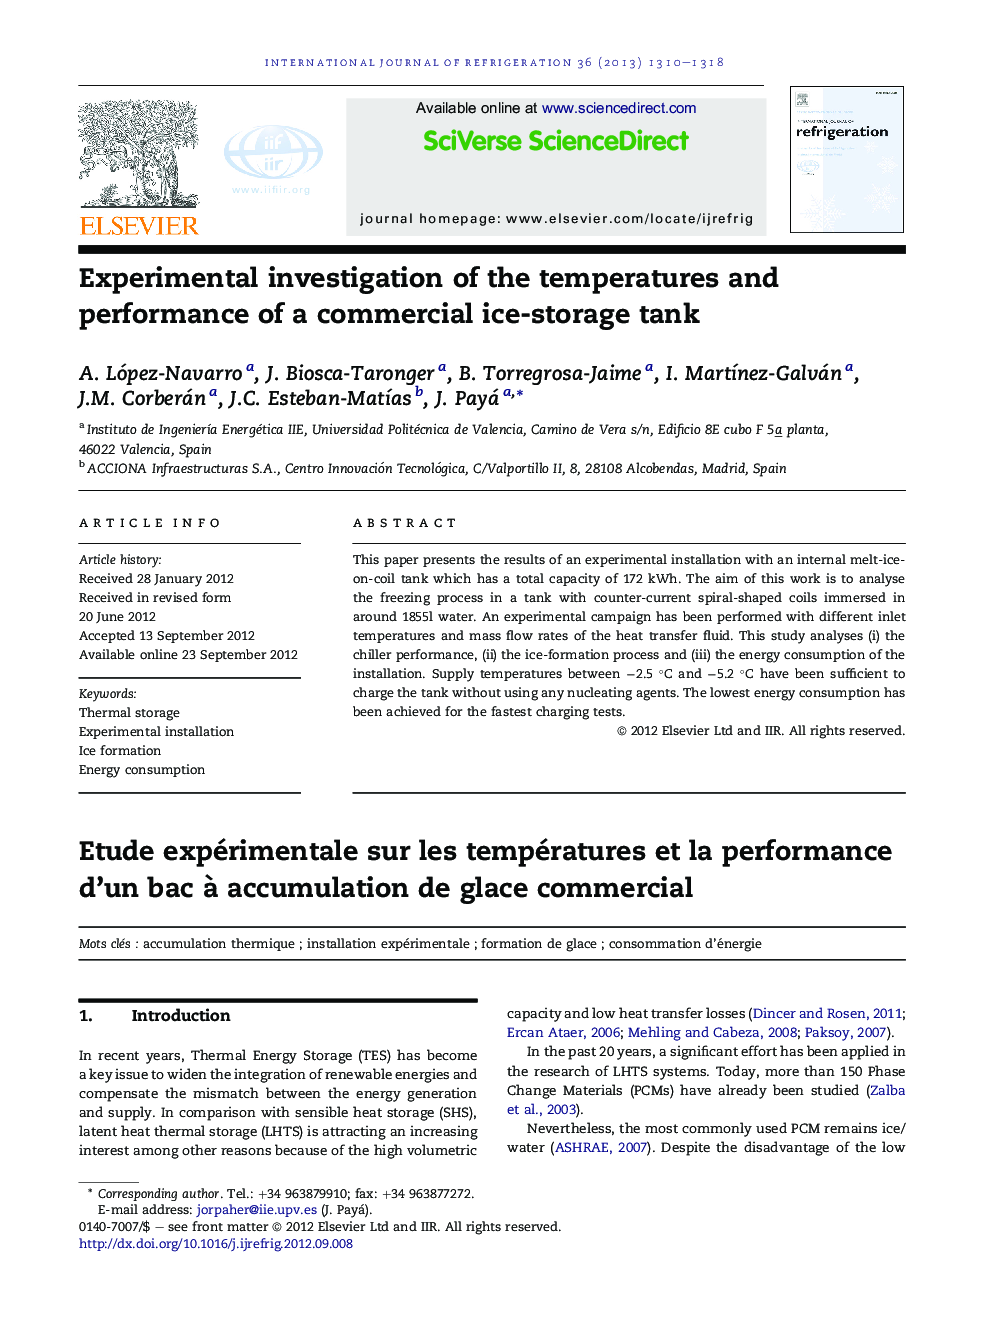 Experimental investigation of the temperatures and performance of a commercial ice-storage tank